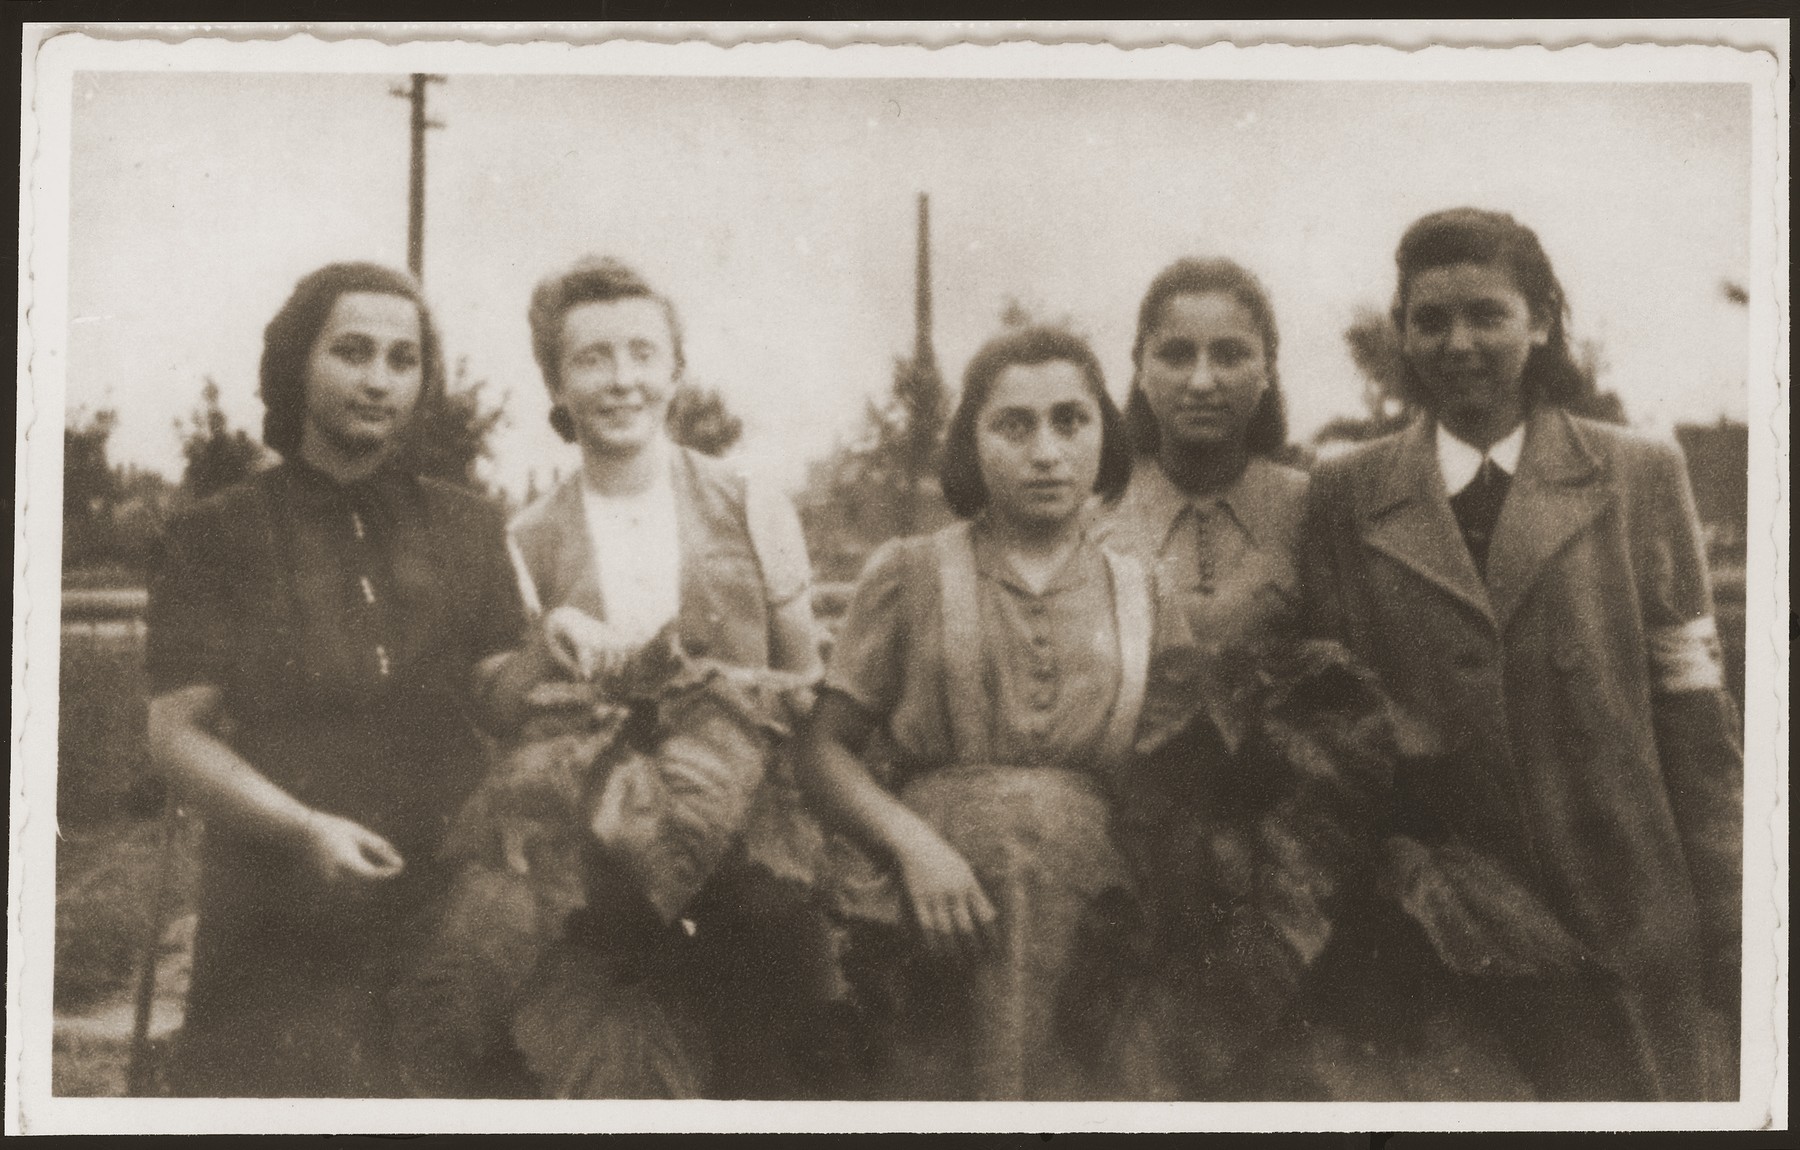 Young women pose together in a vegetable garden in Sosnowiec prior to the establishment of the ghetto.

Pictured from left to right are: Mania Lenczner (now Shafer), Hessa Weingarten (she did not survive the war), Fredzia Zajac (now Schweitzer), Lorka Posner (now Gleitman) and Gucia Adler.